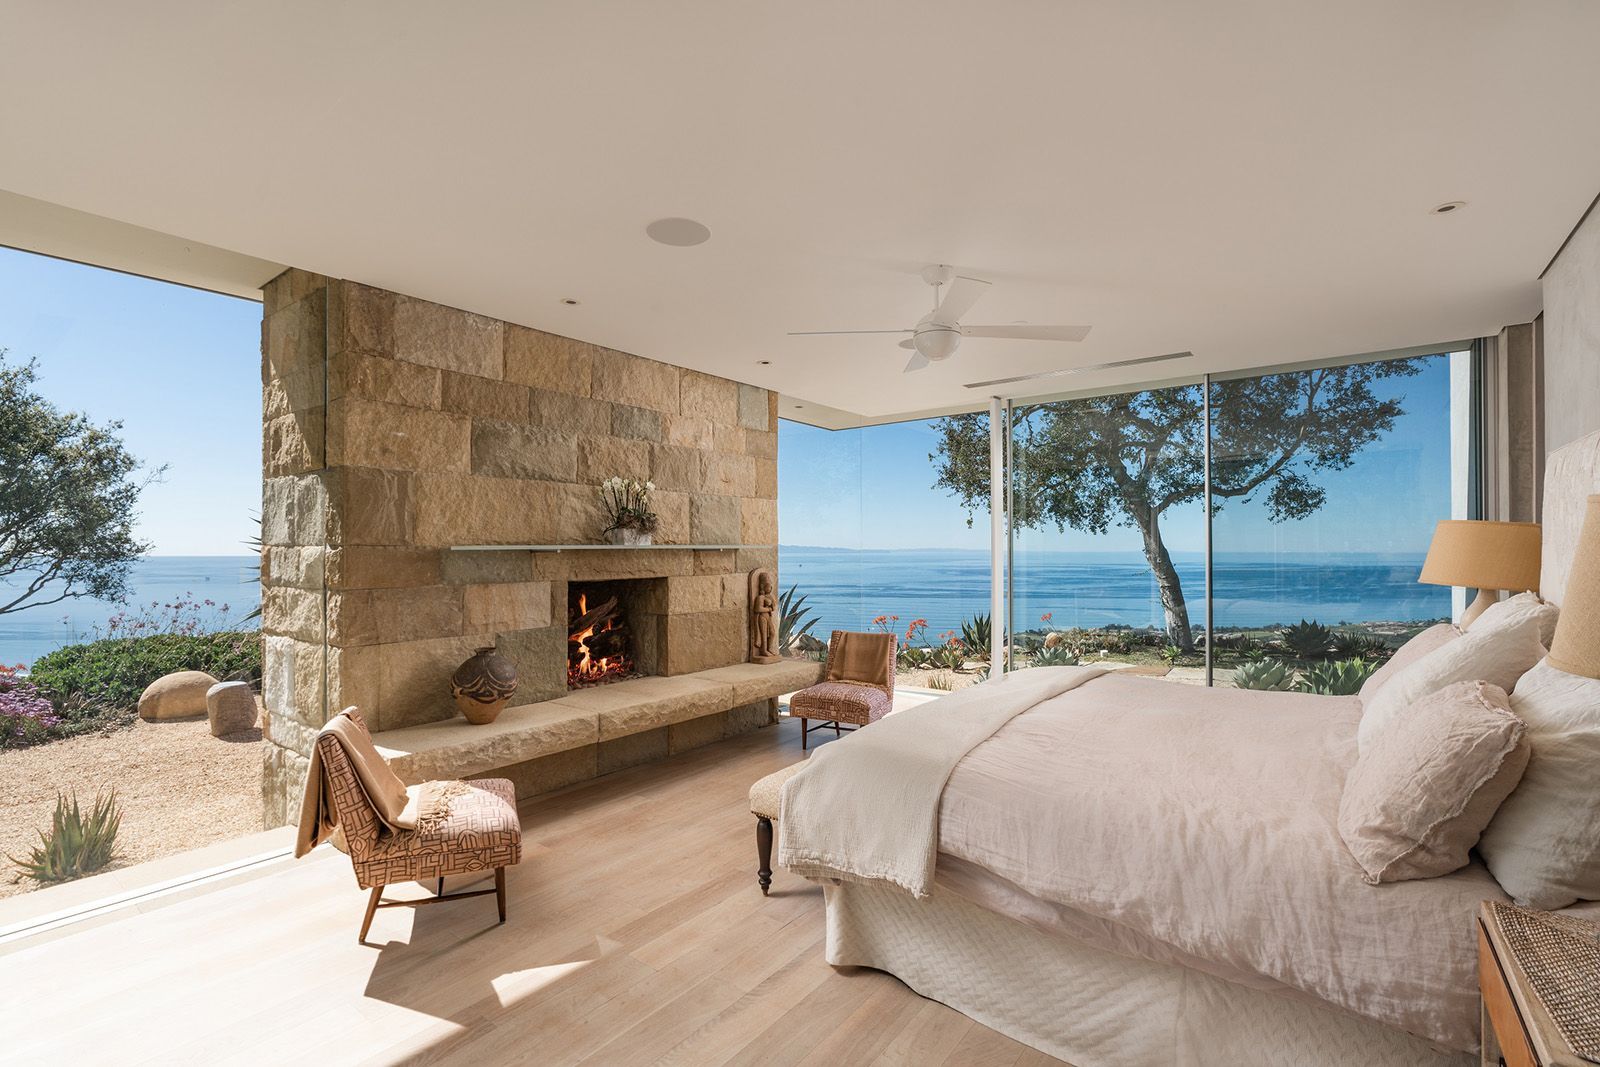 A luxury bedroom surrounded with floor-to-ceiling stone fireplace flanked by walls of windows looking out to the ocean and horizon.